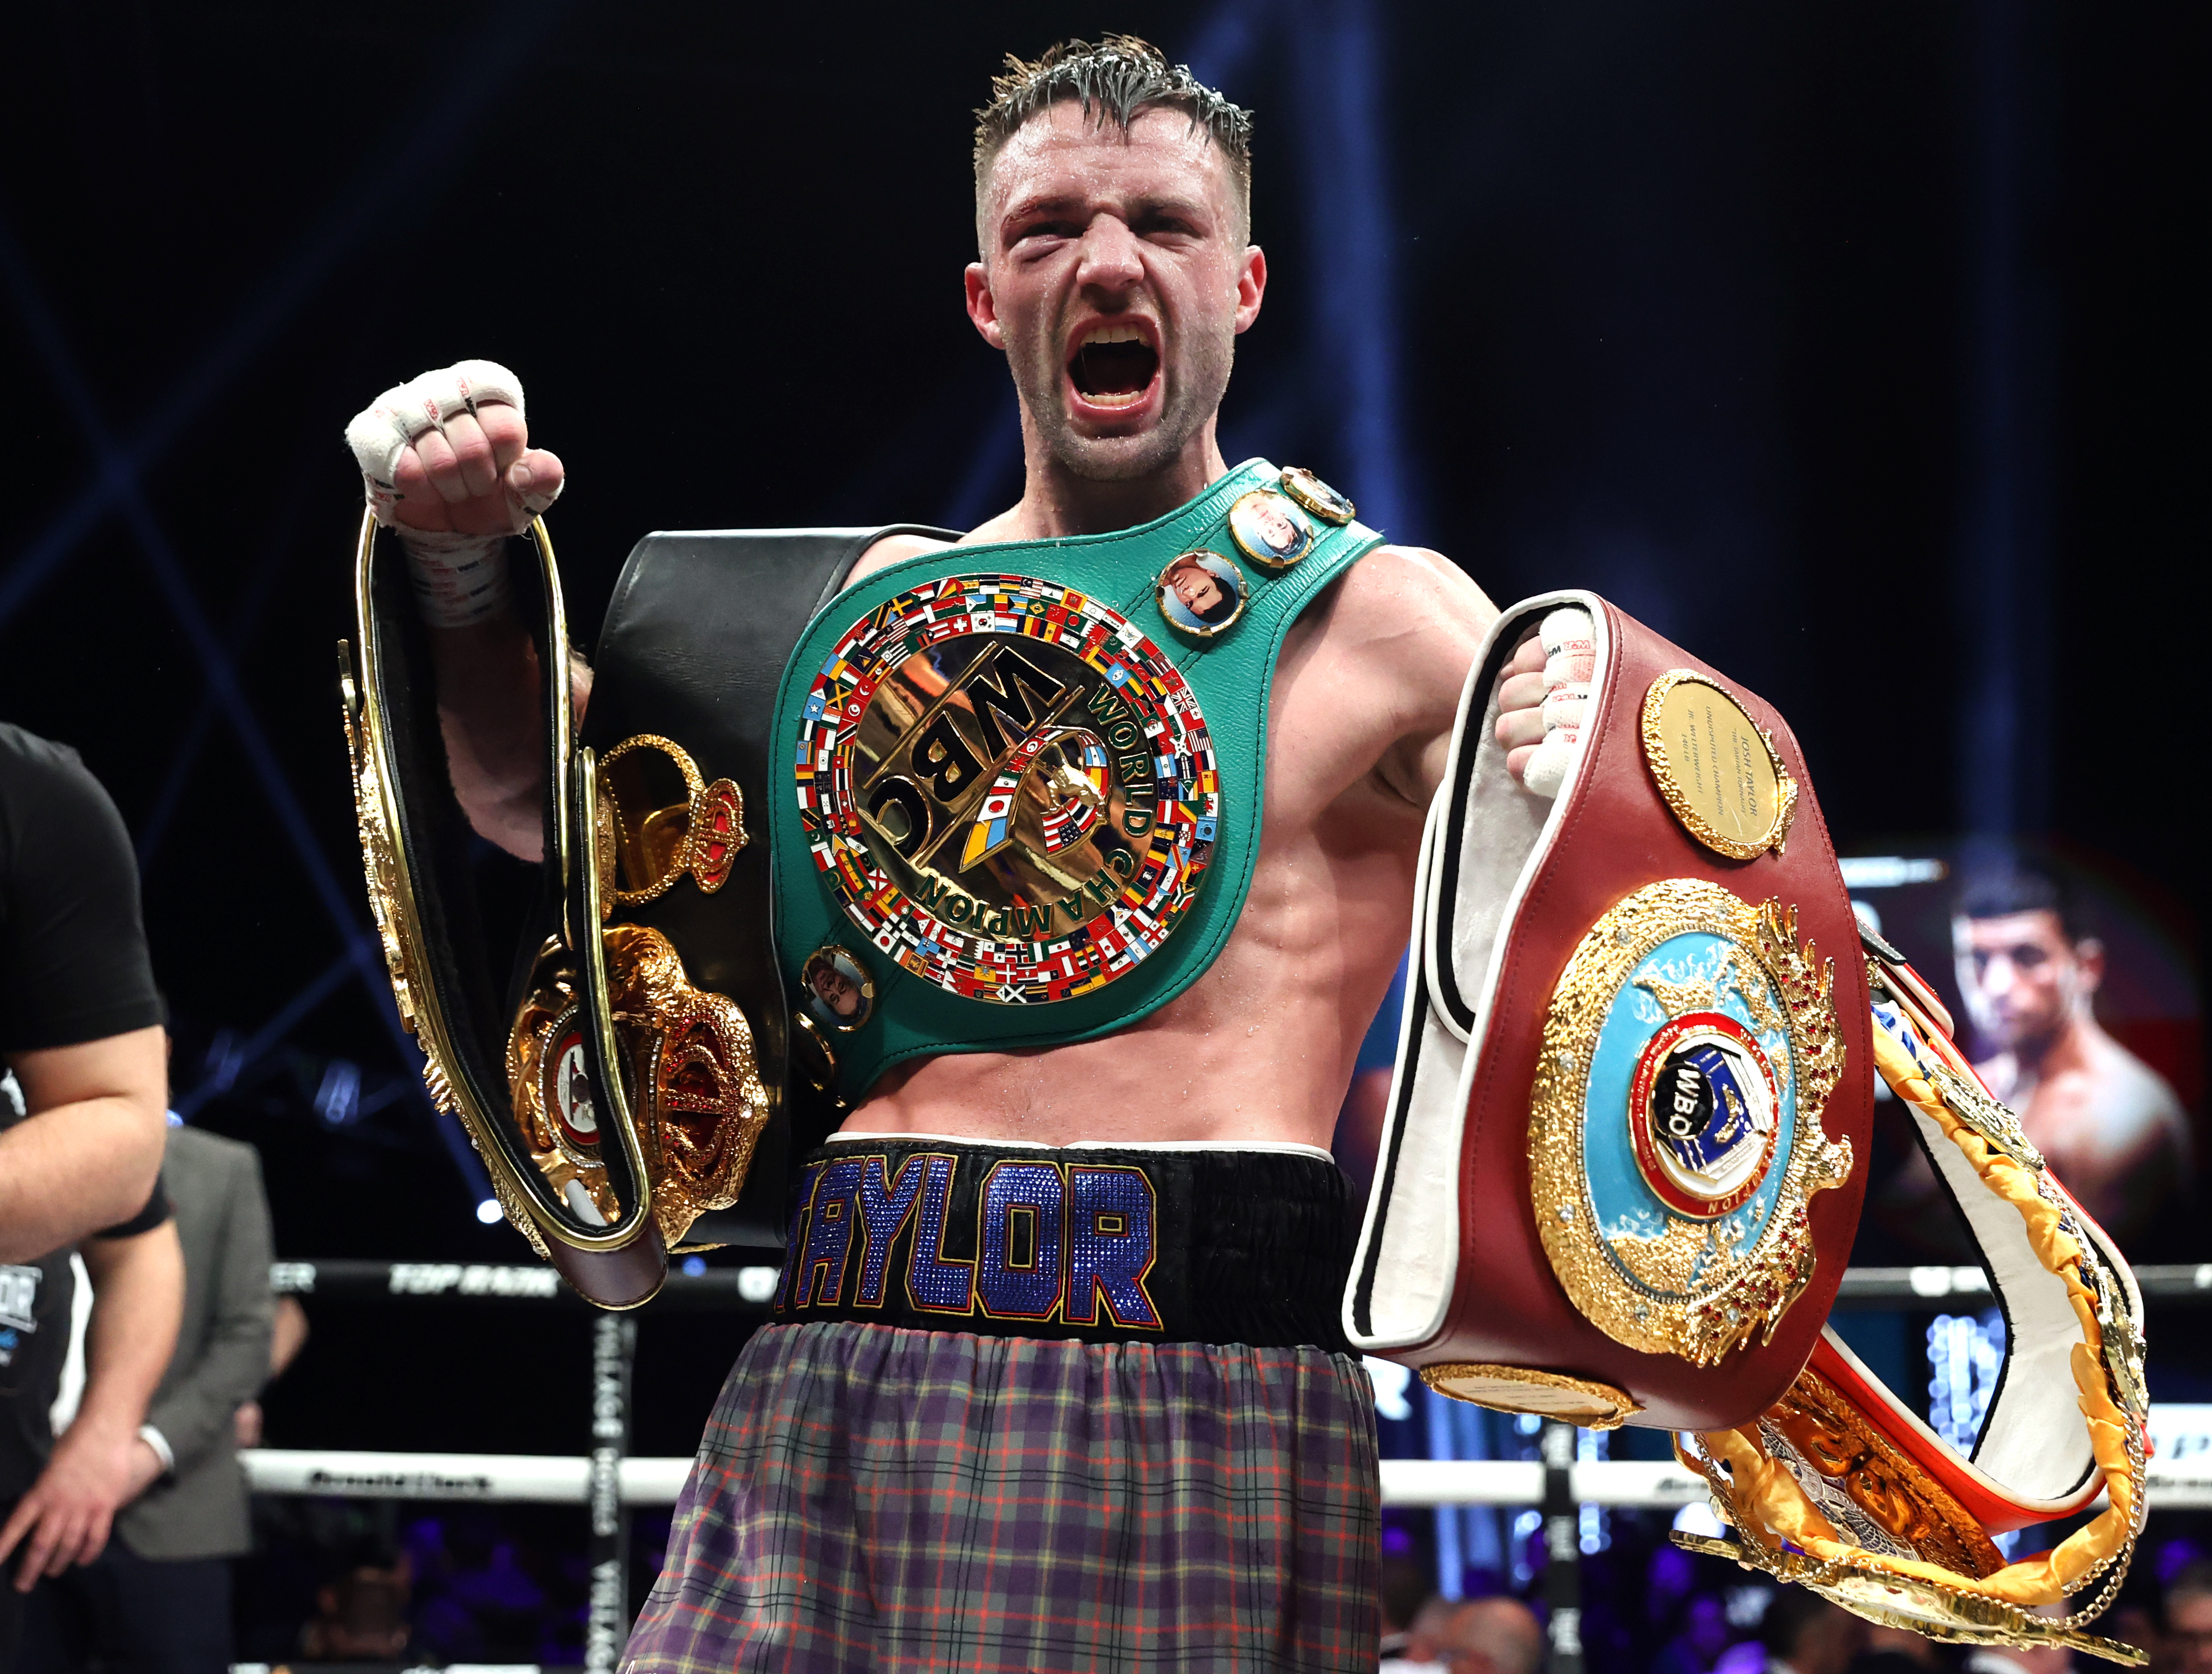 , Ring Magazine top 10 pound-for-pound rankings revealed after Haney’s win over Lomachenko… and just one Brit makes list